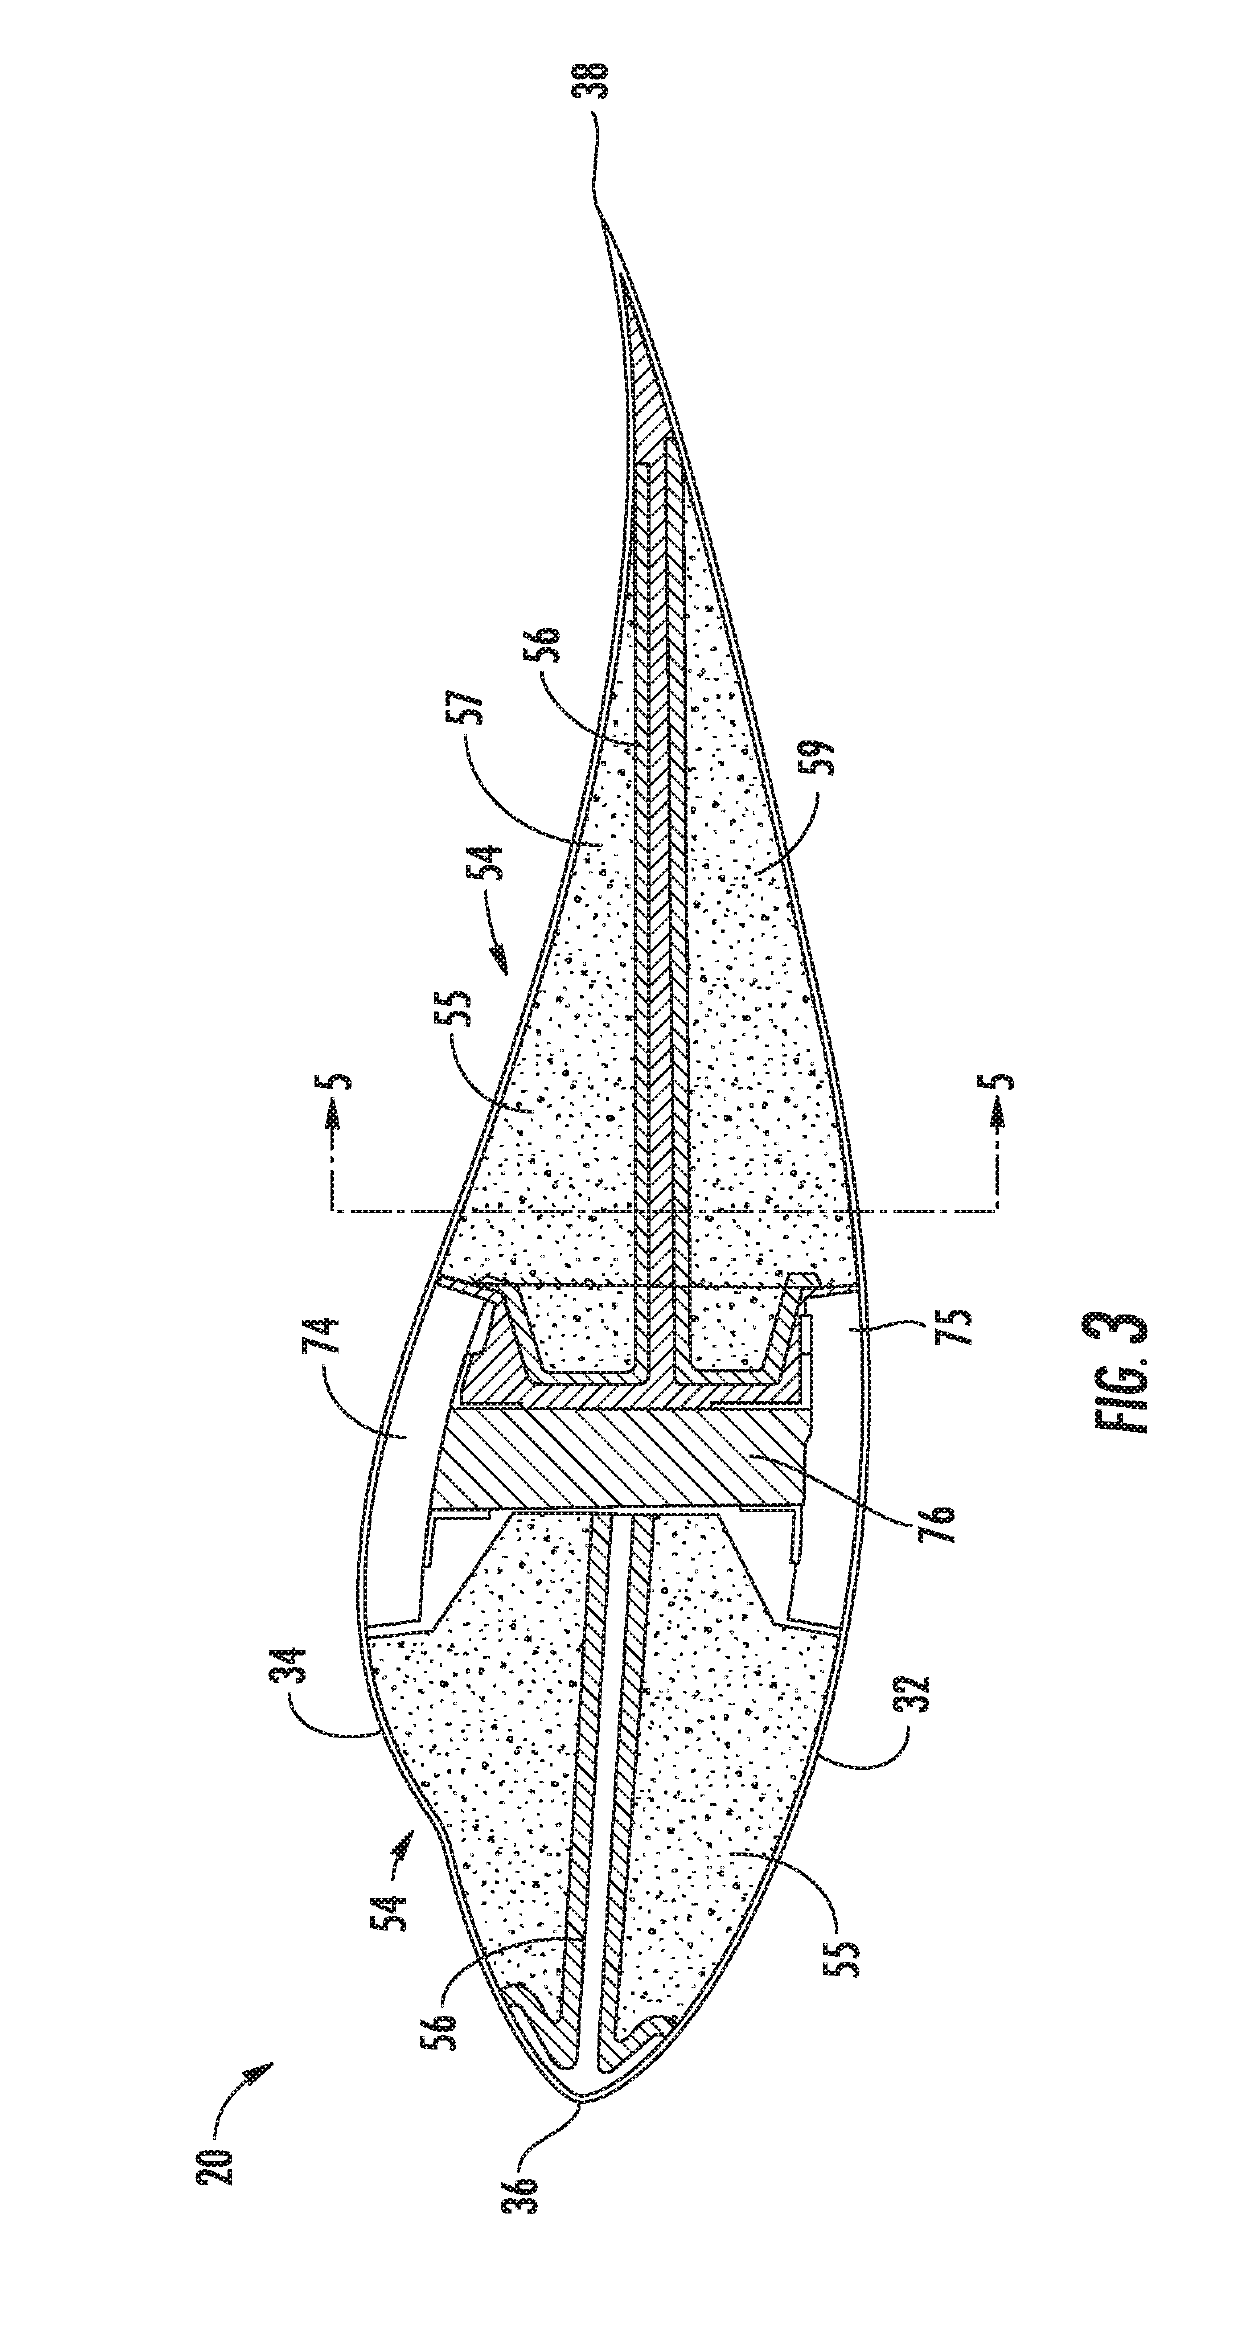 Method of joining blade sections using thermoplastics